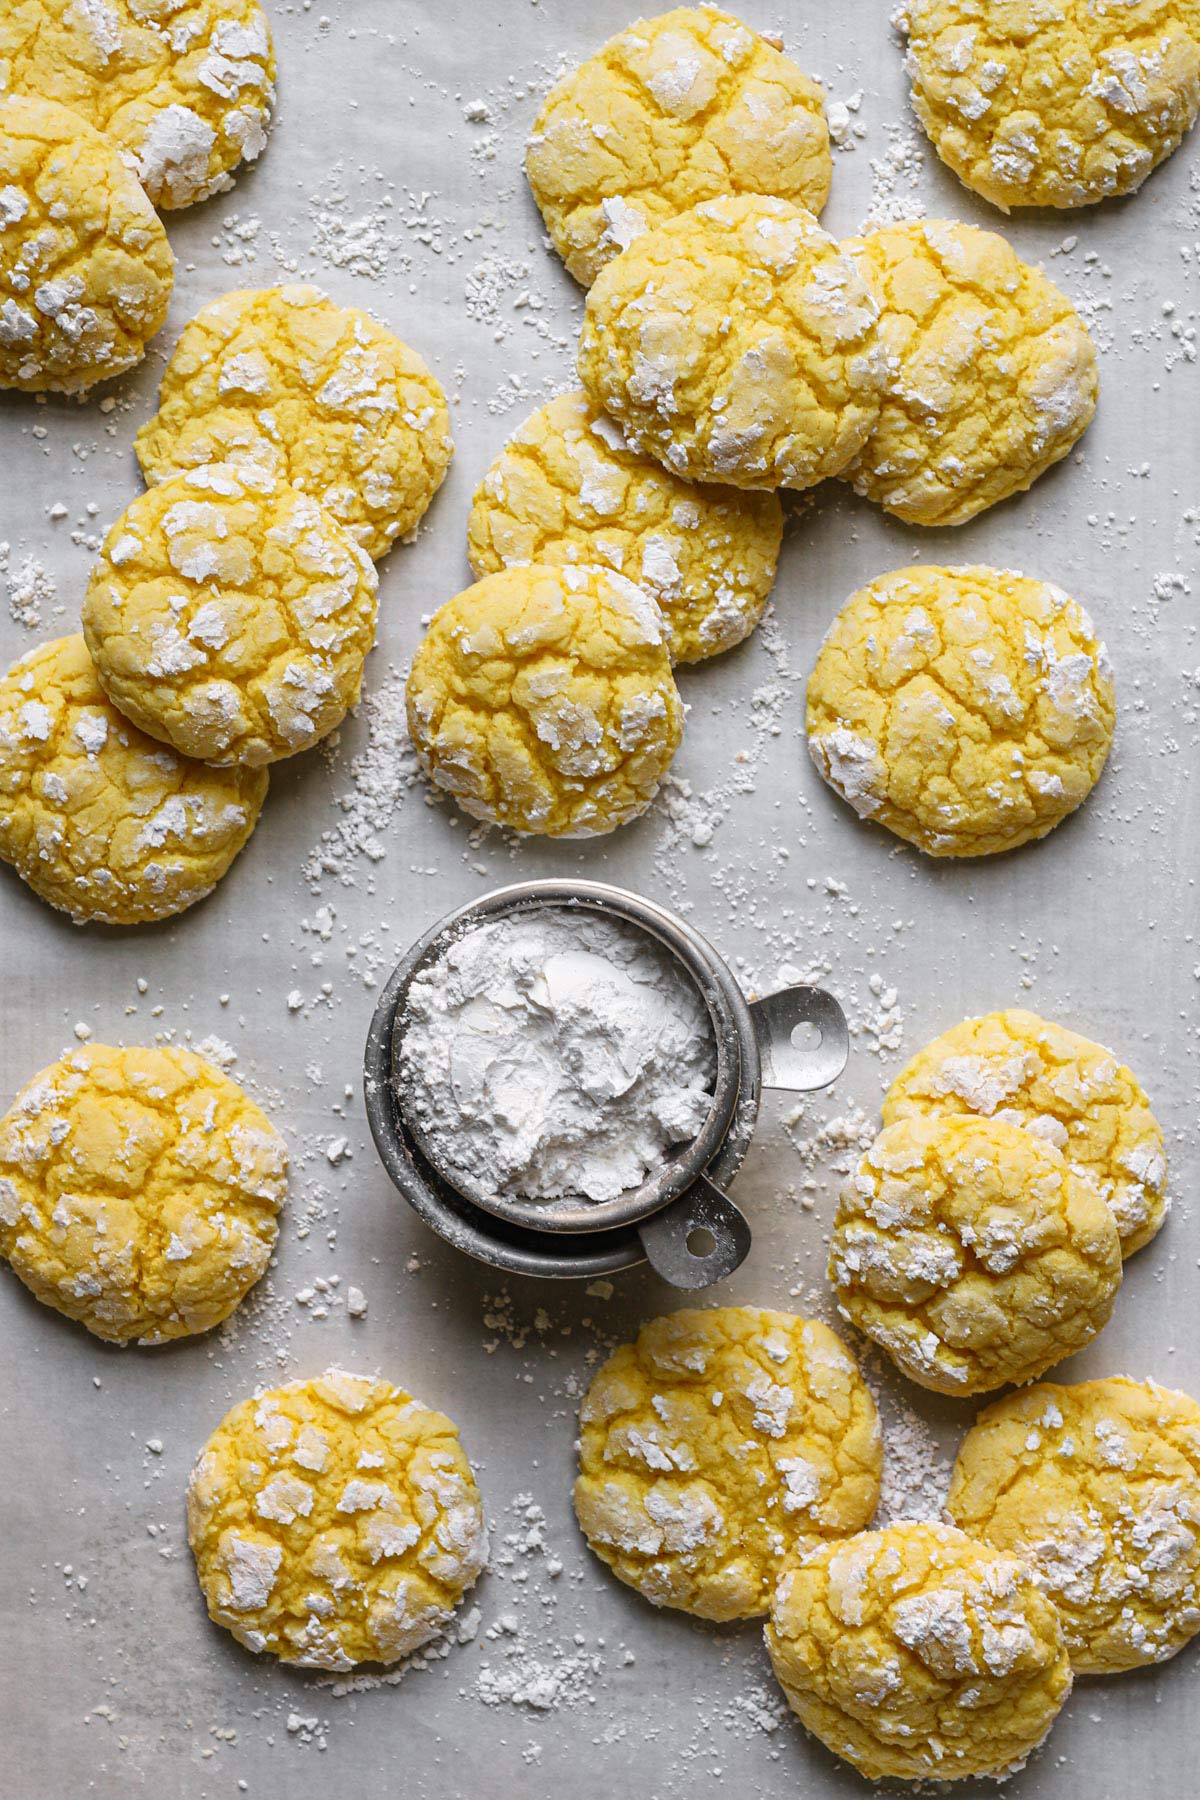 a few lemon crinkle cookies resting on a lined baking sheet dusted in powdered sugar with a small bowl of powdered sugar in the center